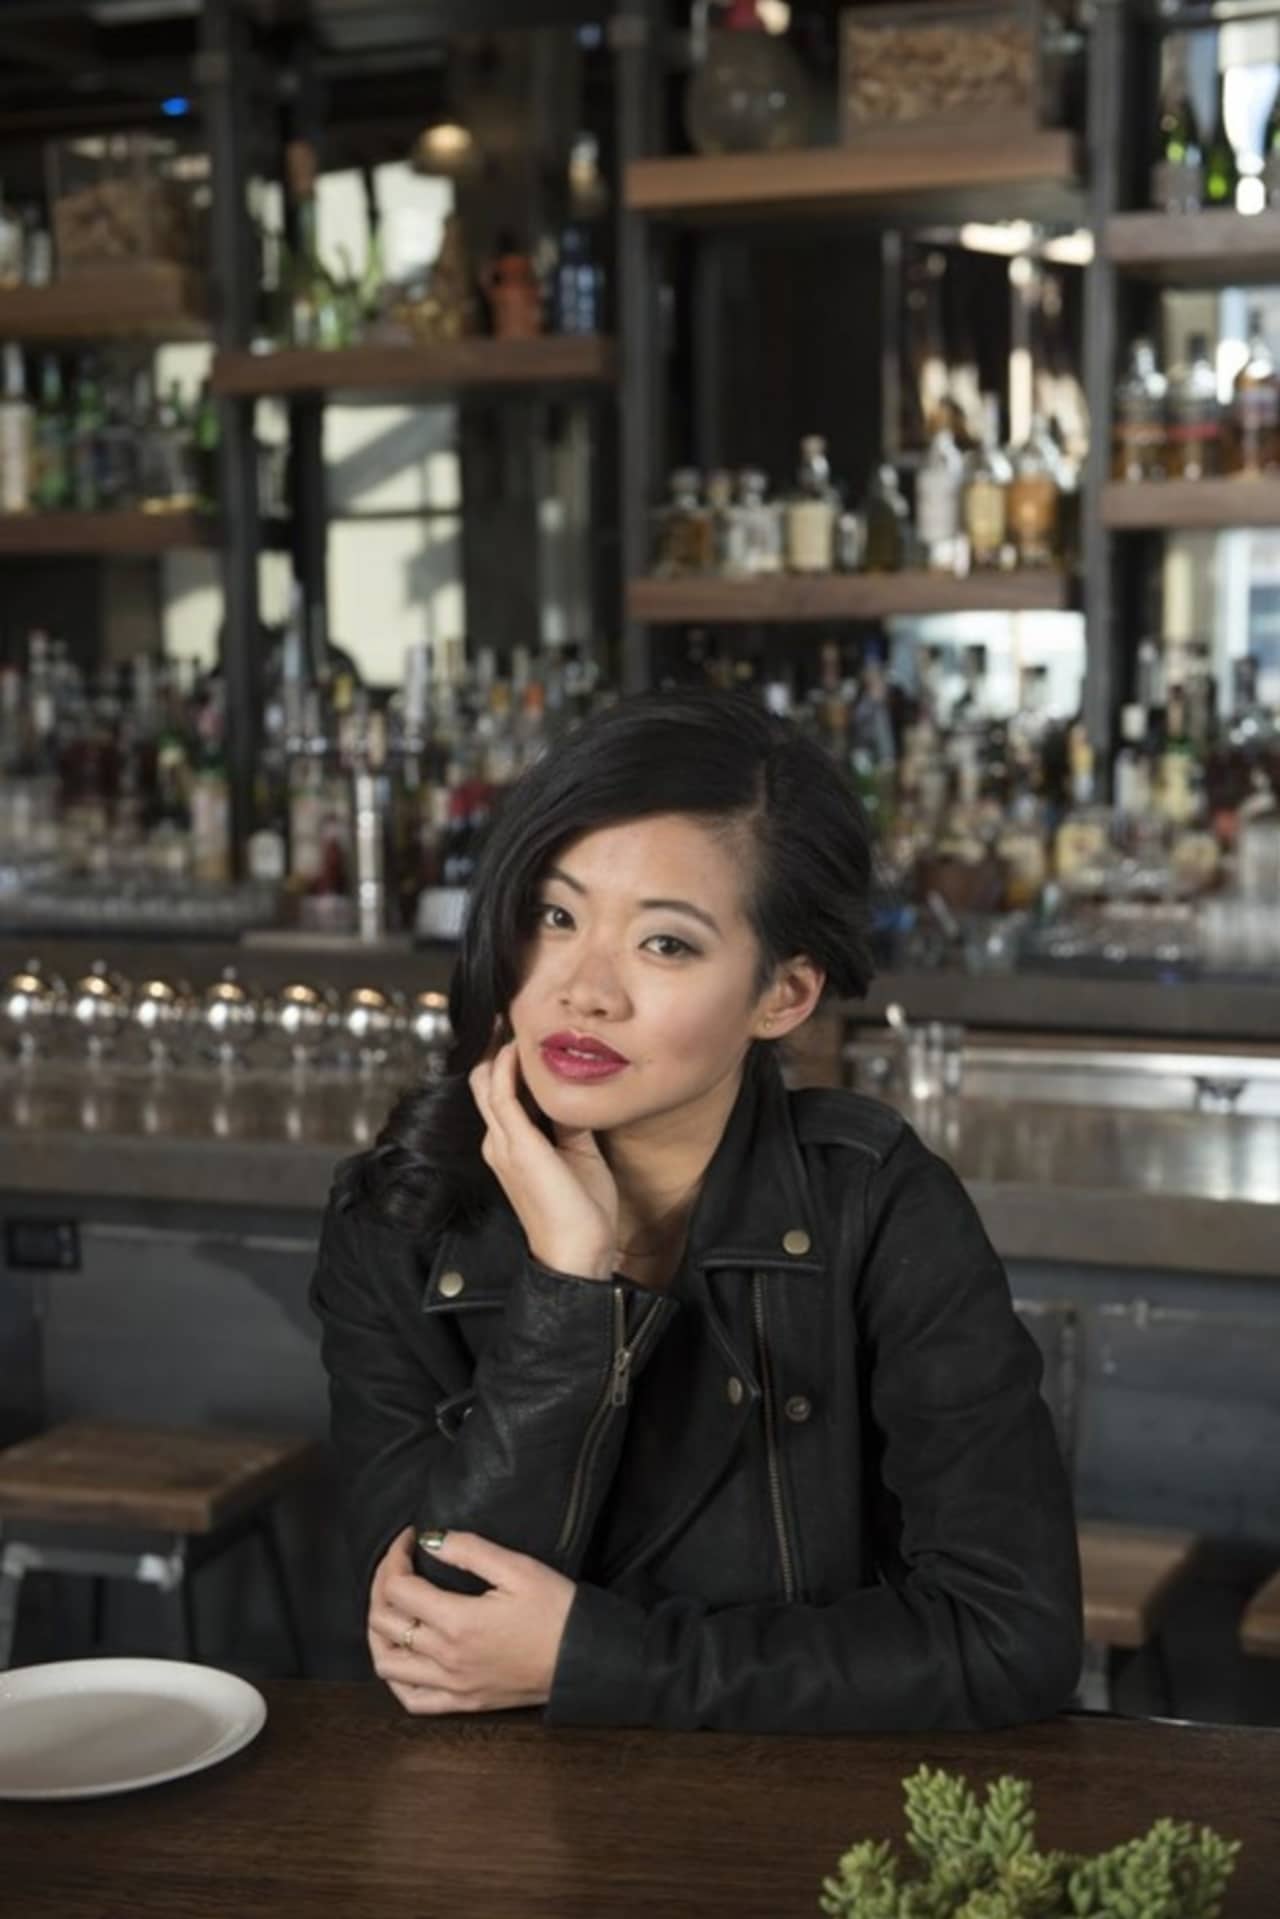 Jessica Tom is the author of "Food Whore", her first novel.